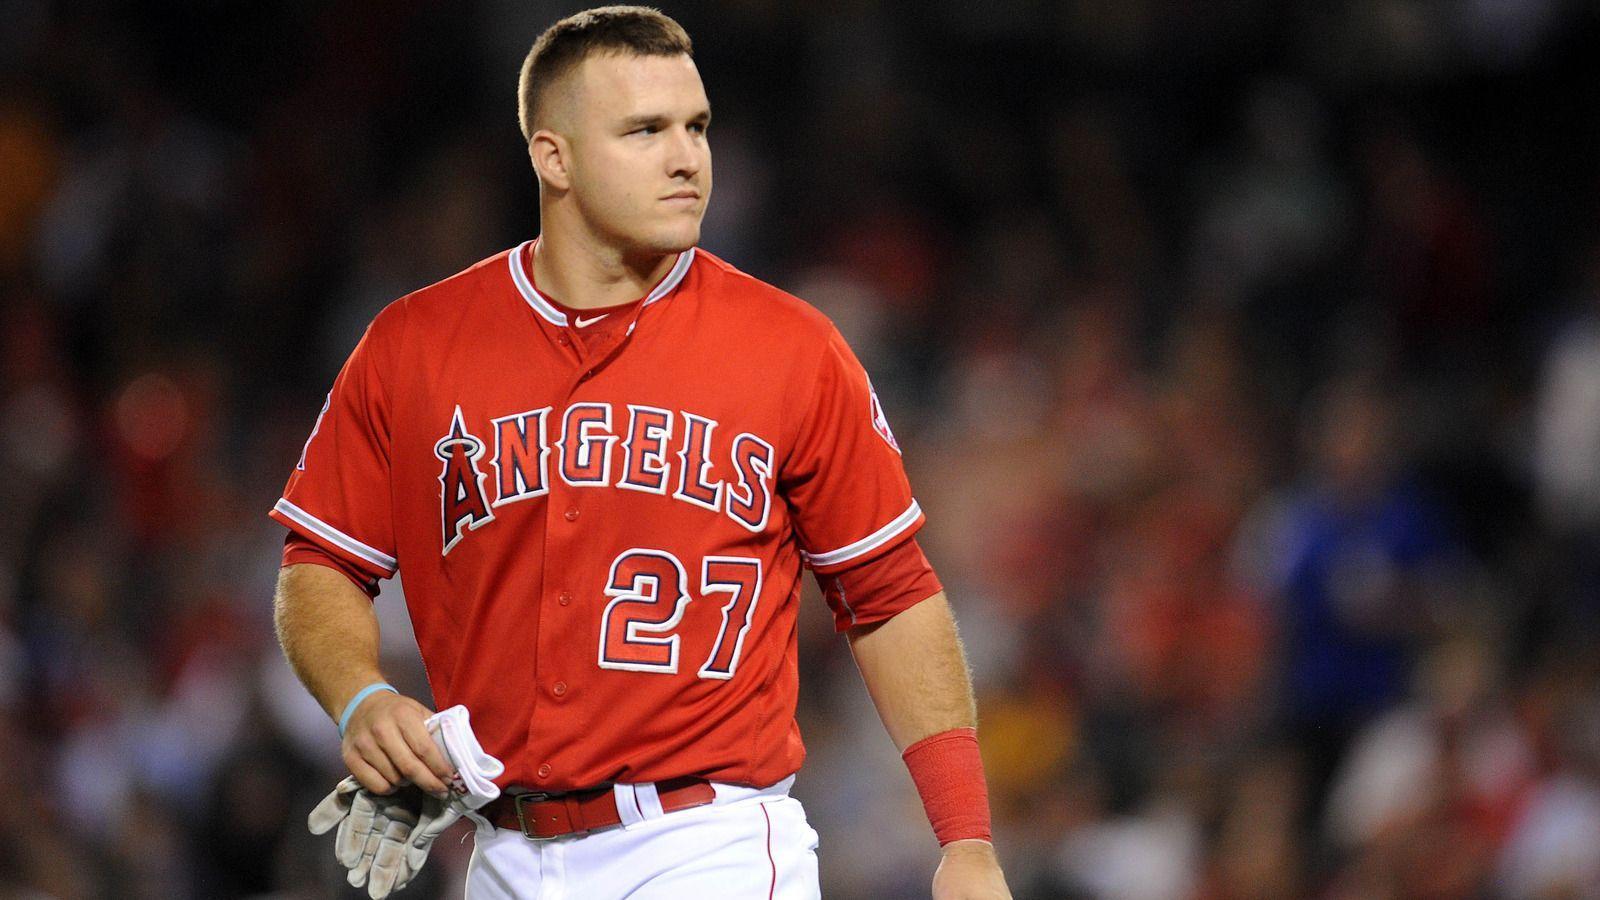 Mike Trout talks about 'frustrating' struggles of Angels